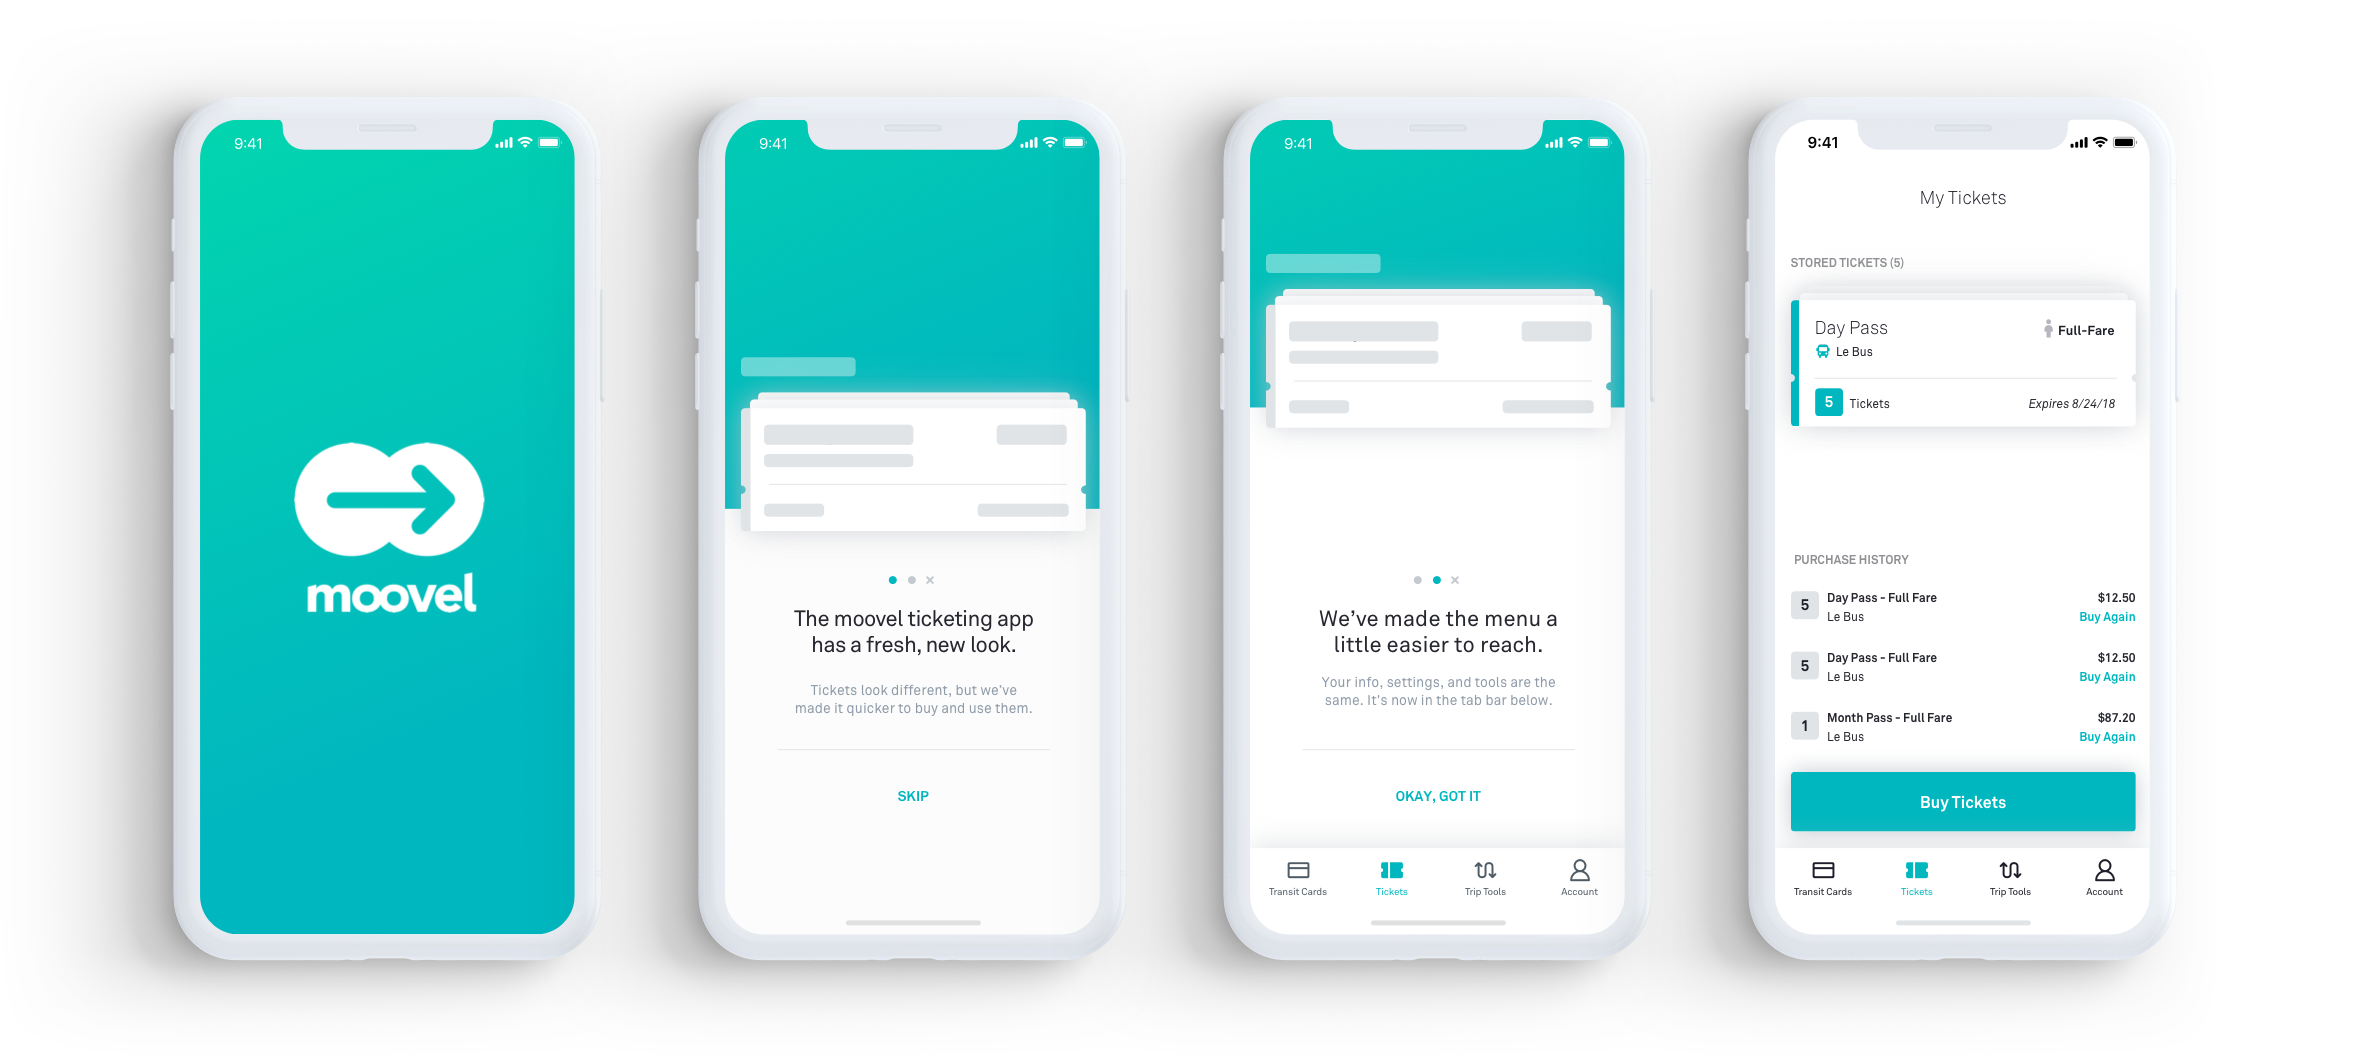 Screens designed for the moovel onboarding tour